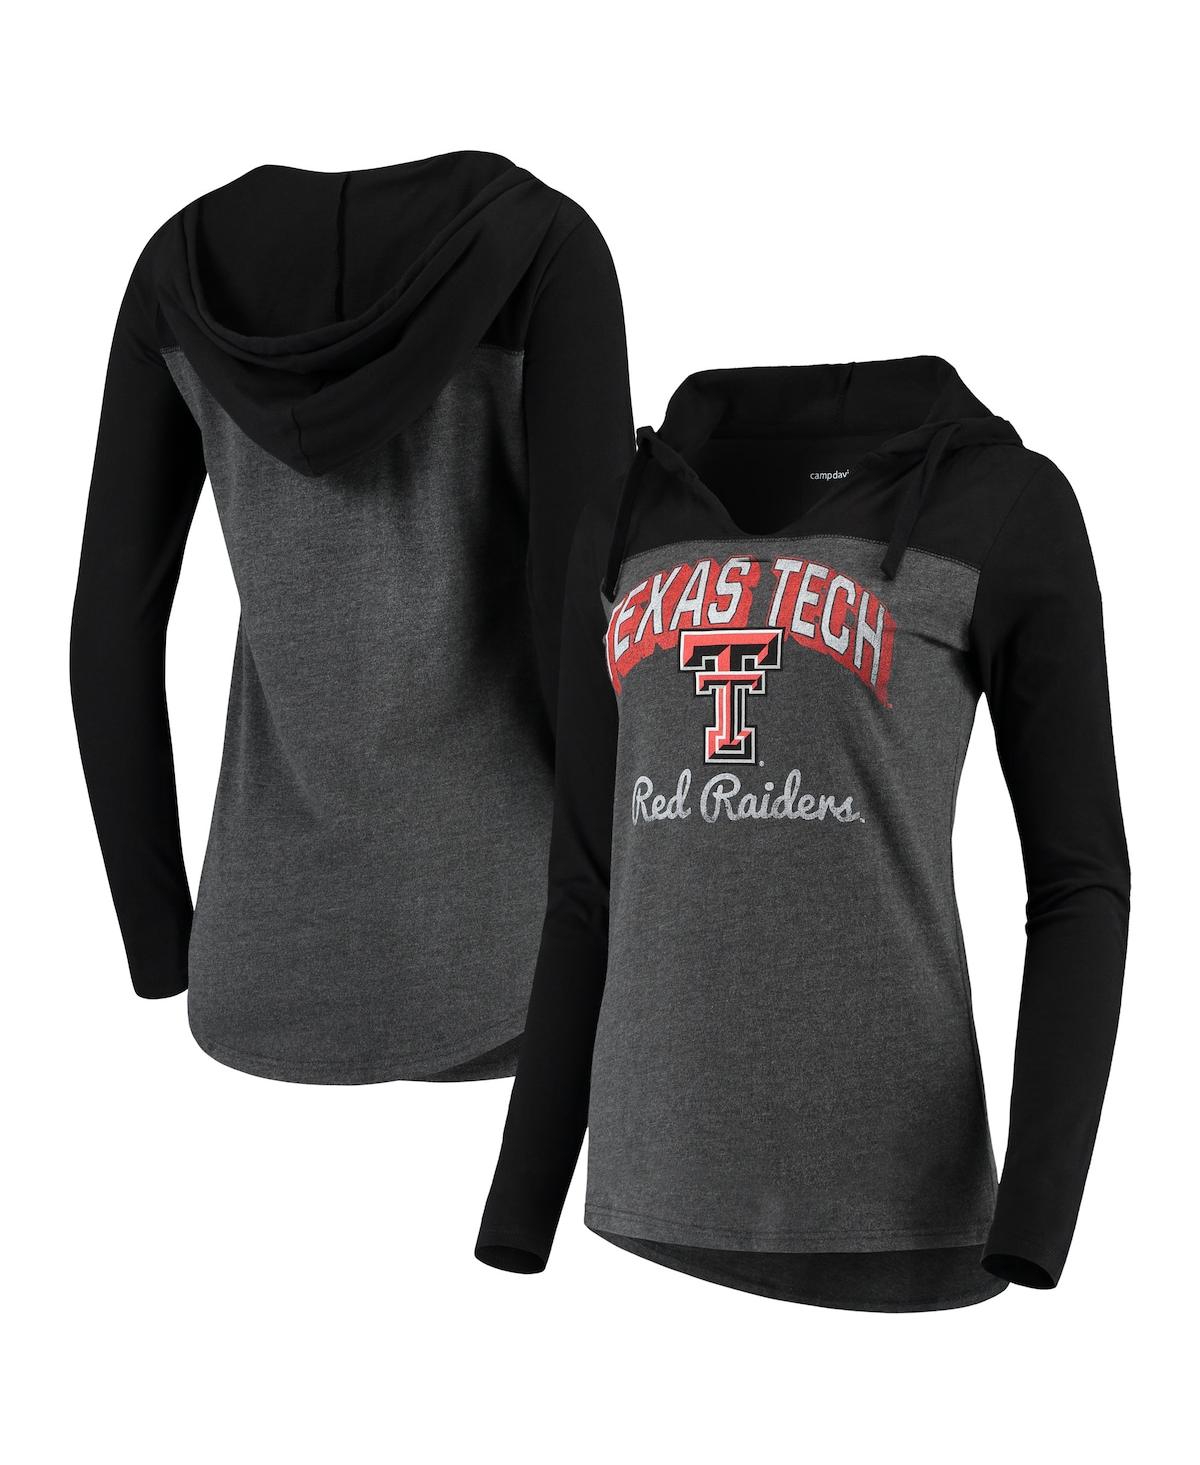 Women's Charcoal Texas Tech Red Raiders Knockout Color Block Long Sleeve V-Neck Hoodie T-shirt - Charcoal